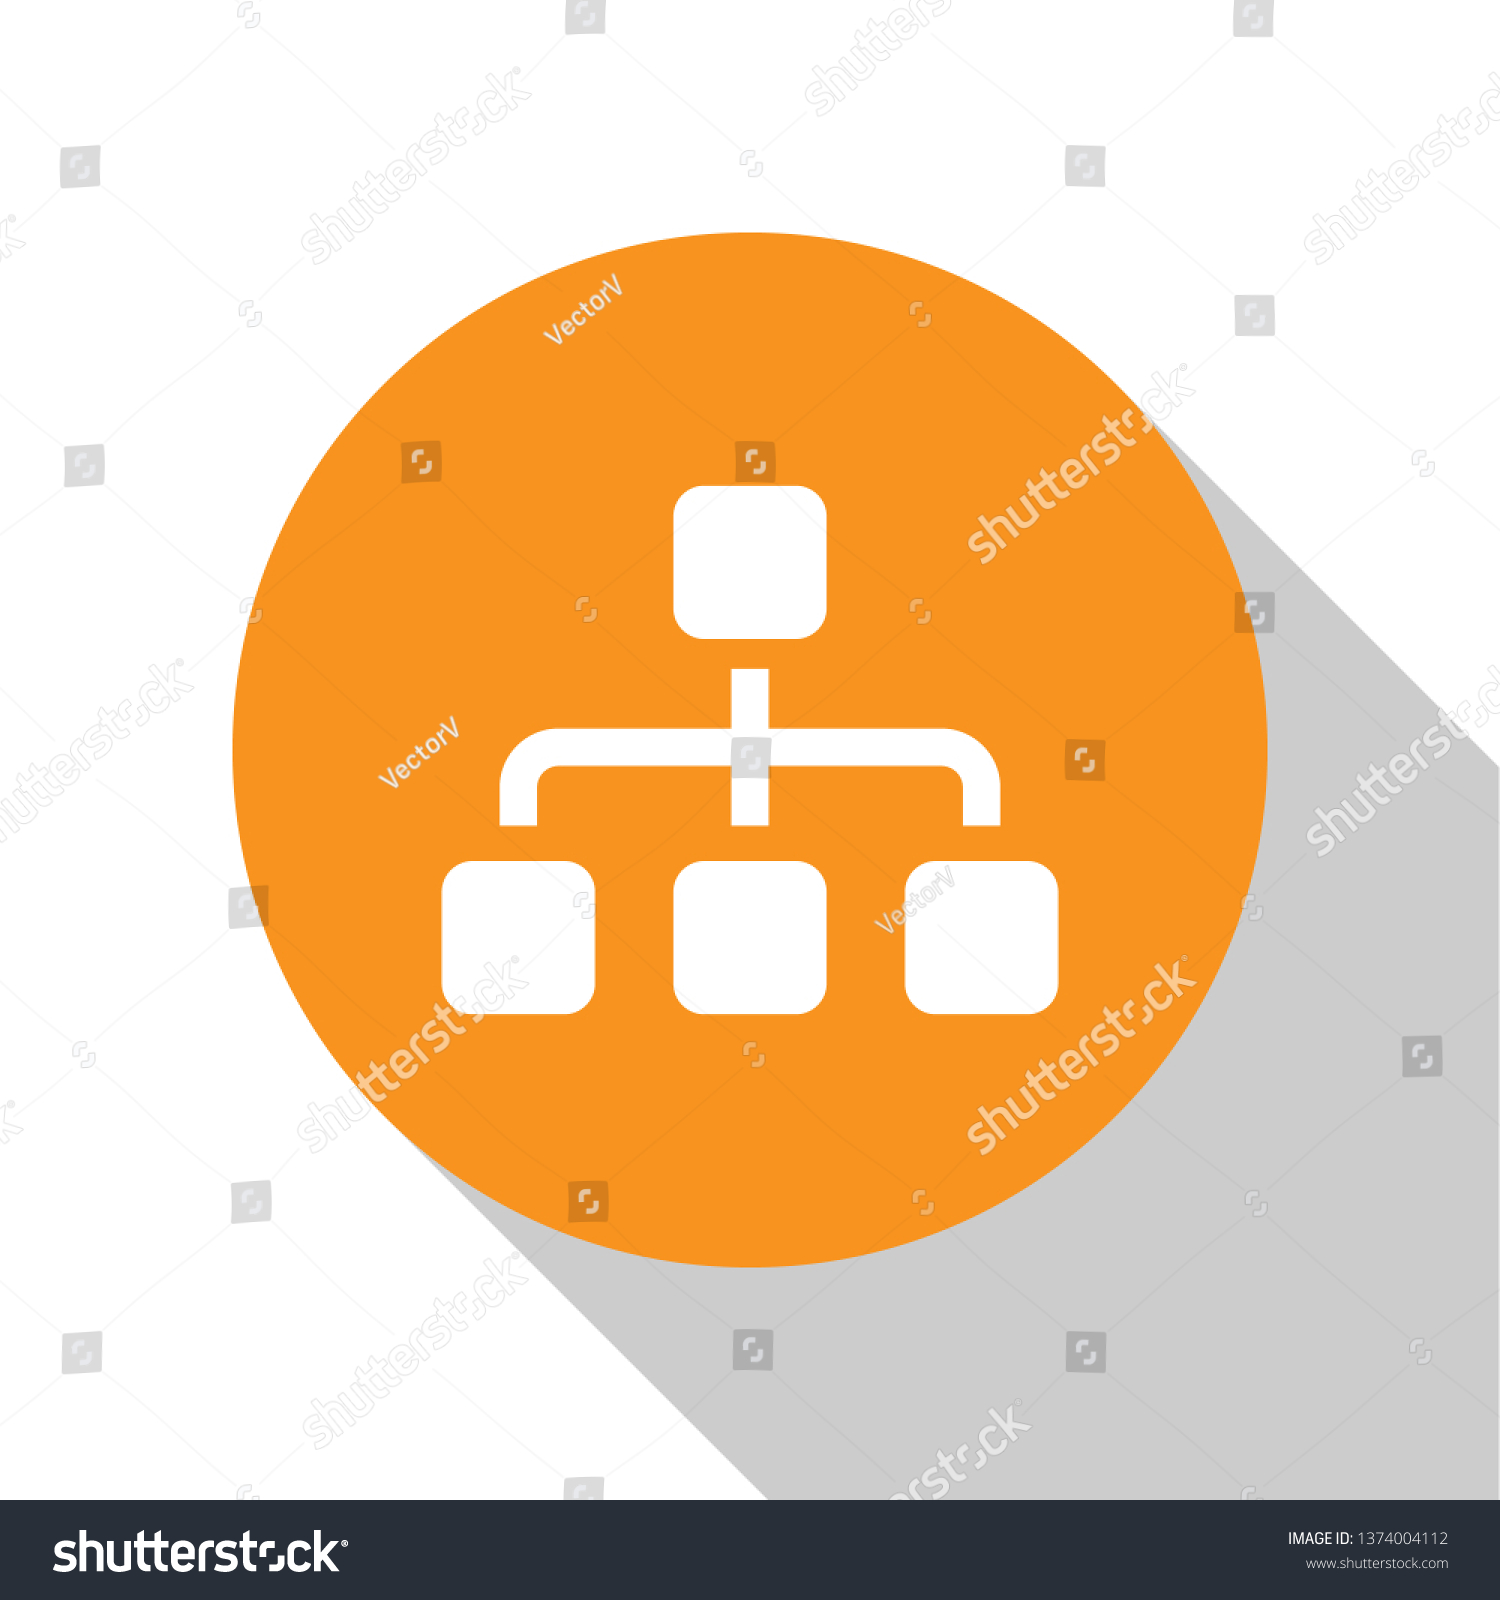 White Business hierarchy organogram chart infographics icon isolated on white background. Corporate organizational structure graphic elements. Orange circle button. Flat design. Vector Illustration #1374004112